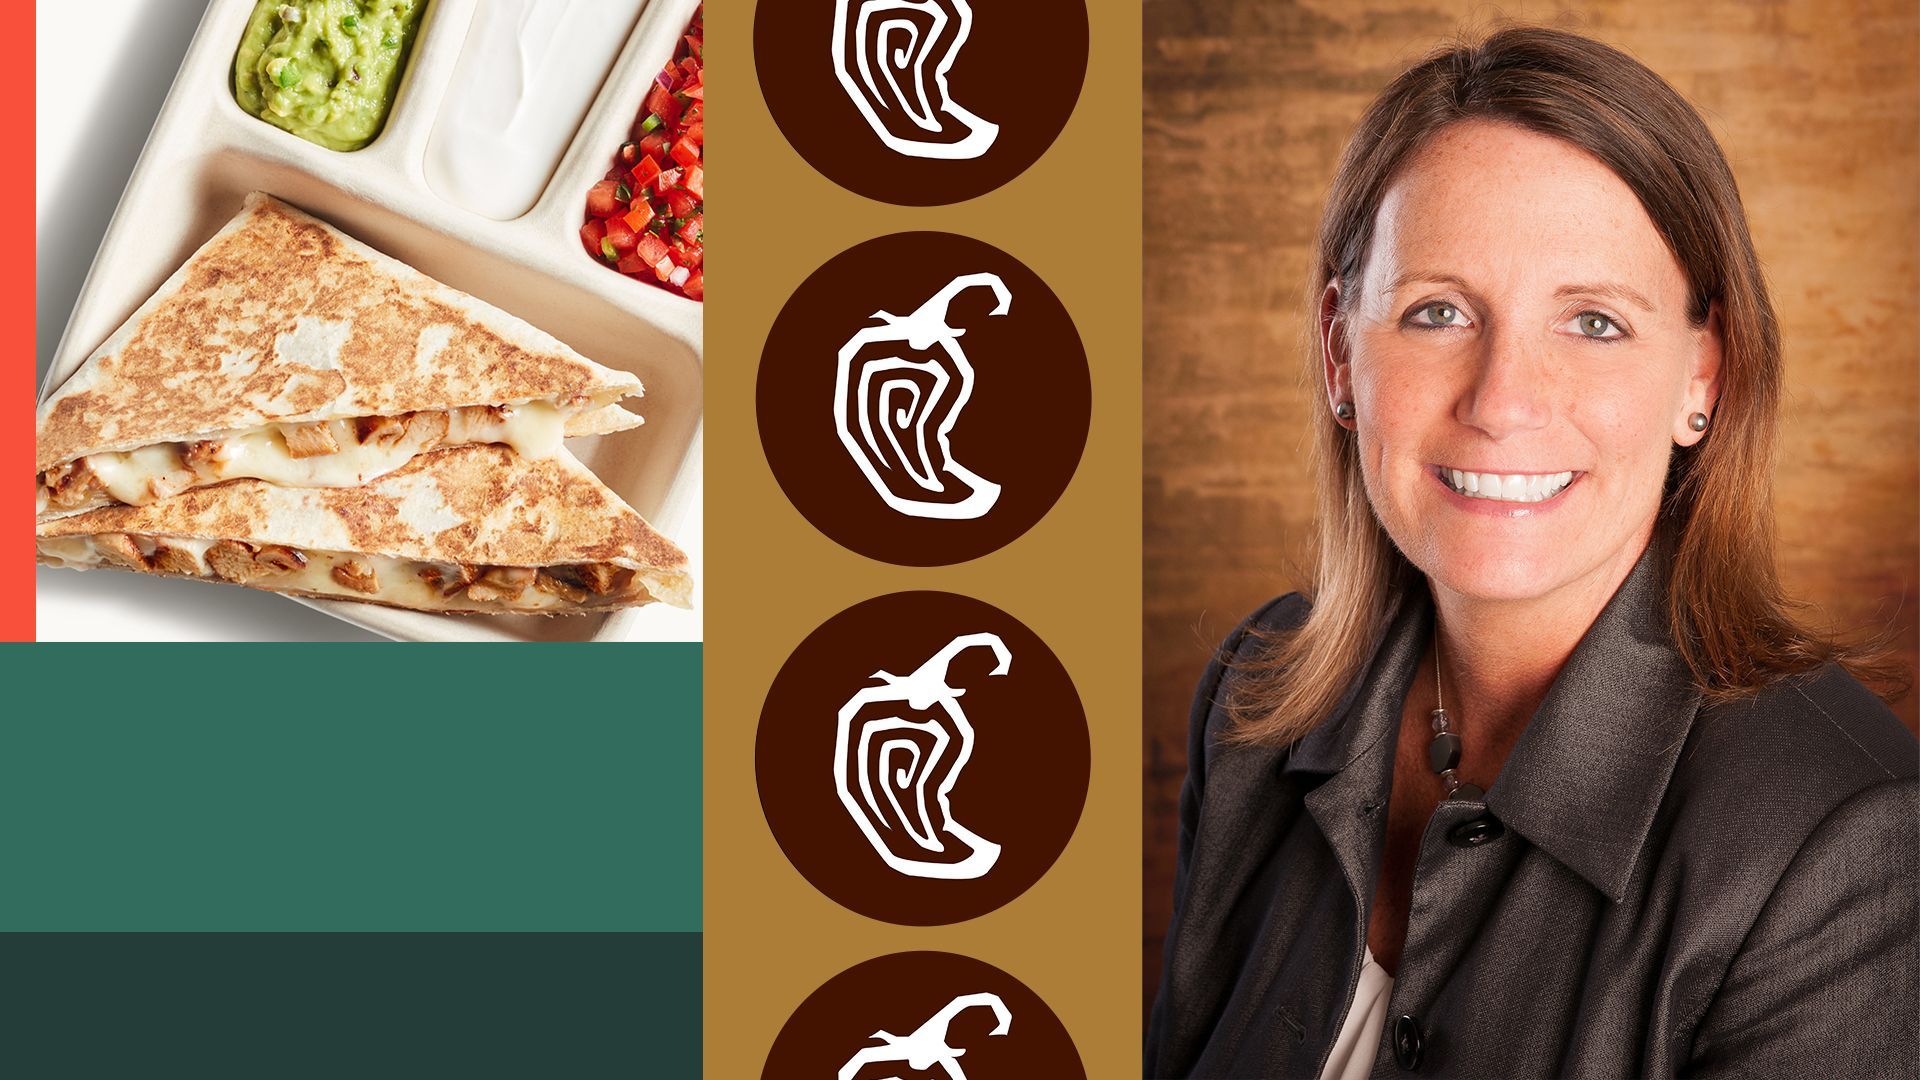 Photo illustration of Laurie Schalow with Chipotle's logo and a photo of a Chipotle quesadilla.